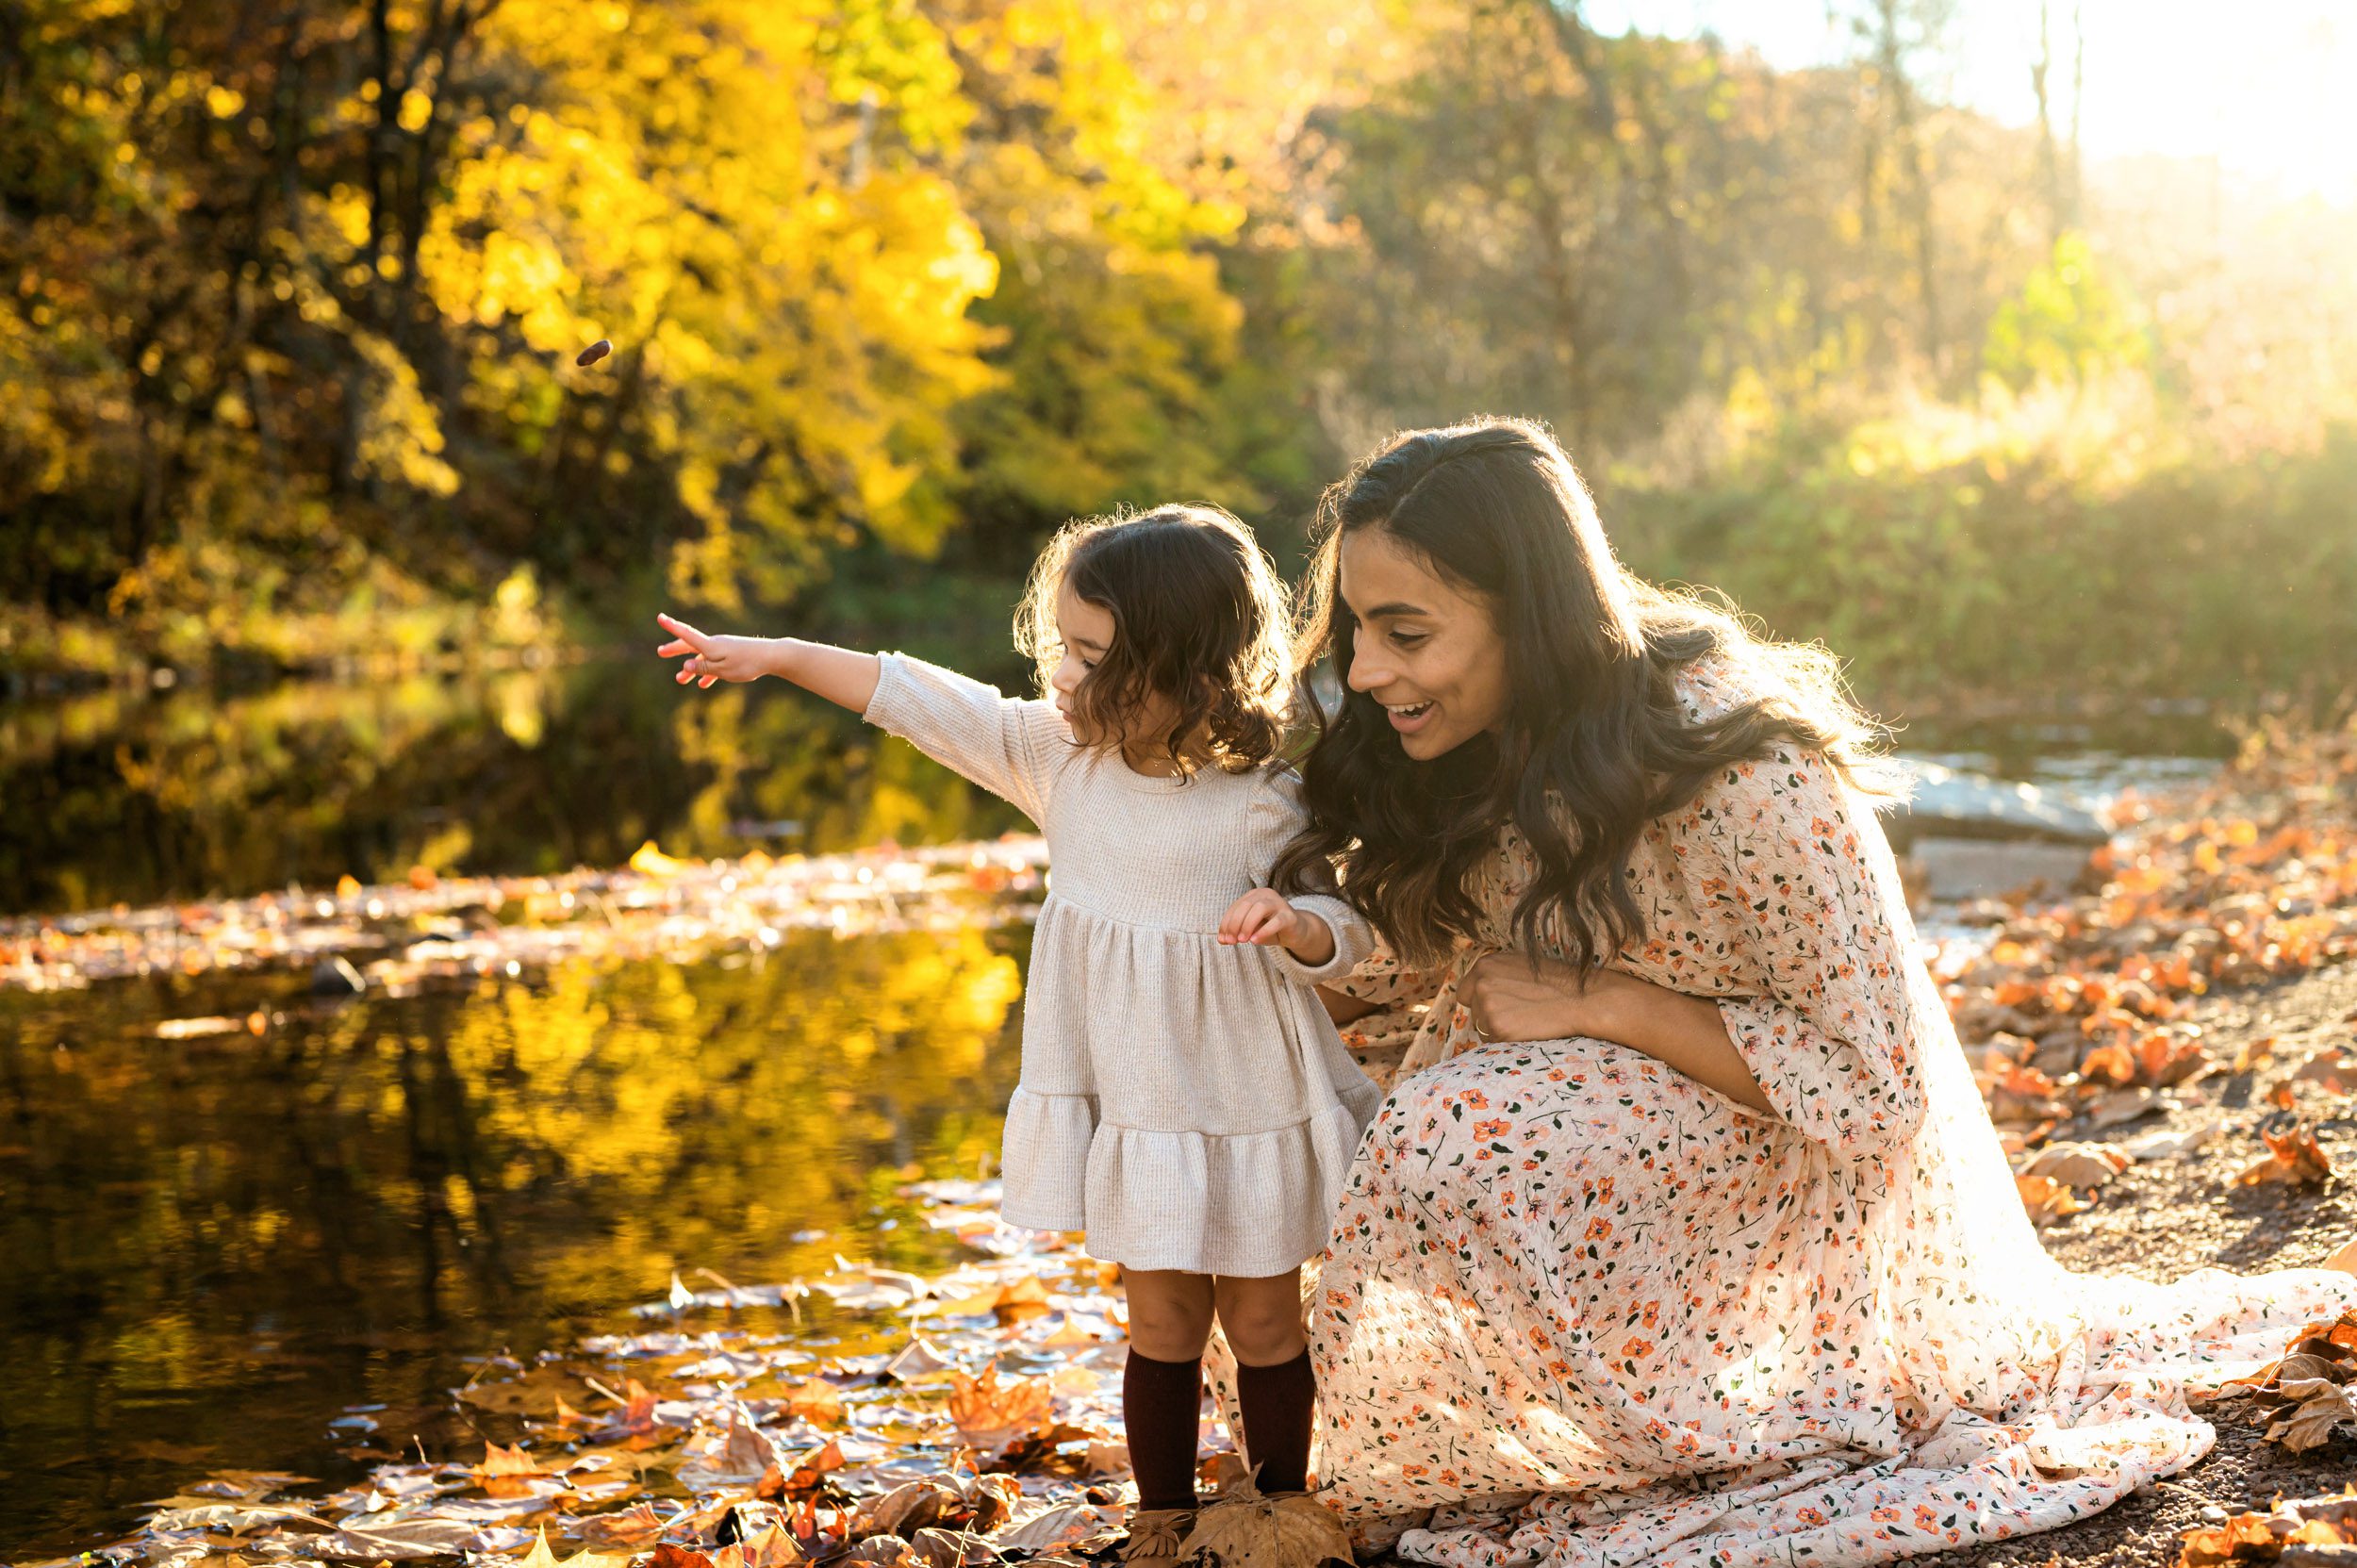 a young girl throwing a stone into a creek with the colorful autumn leaves reflecting off the water in the background during a maternity photo session